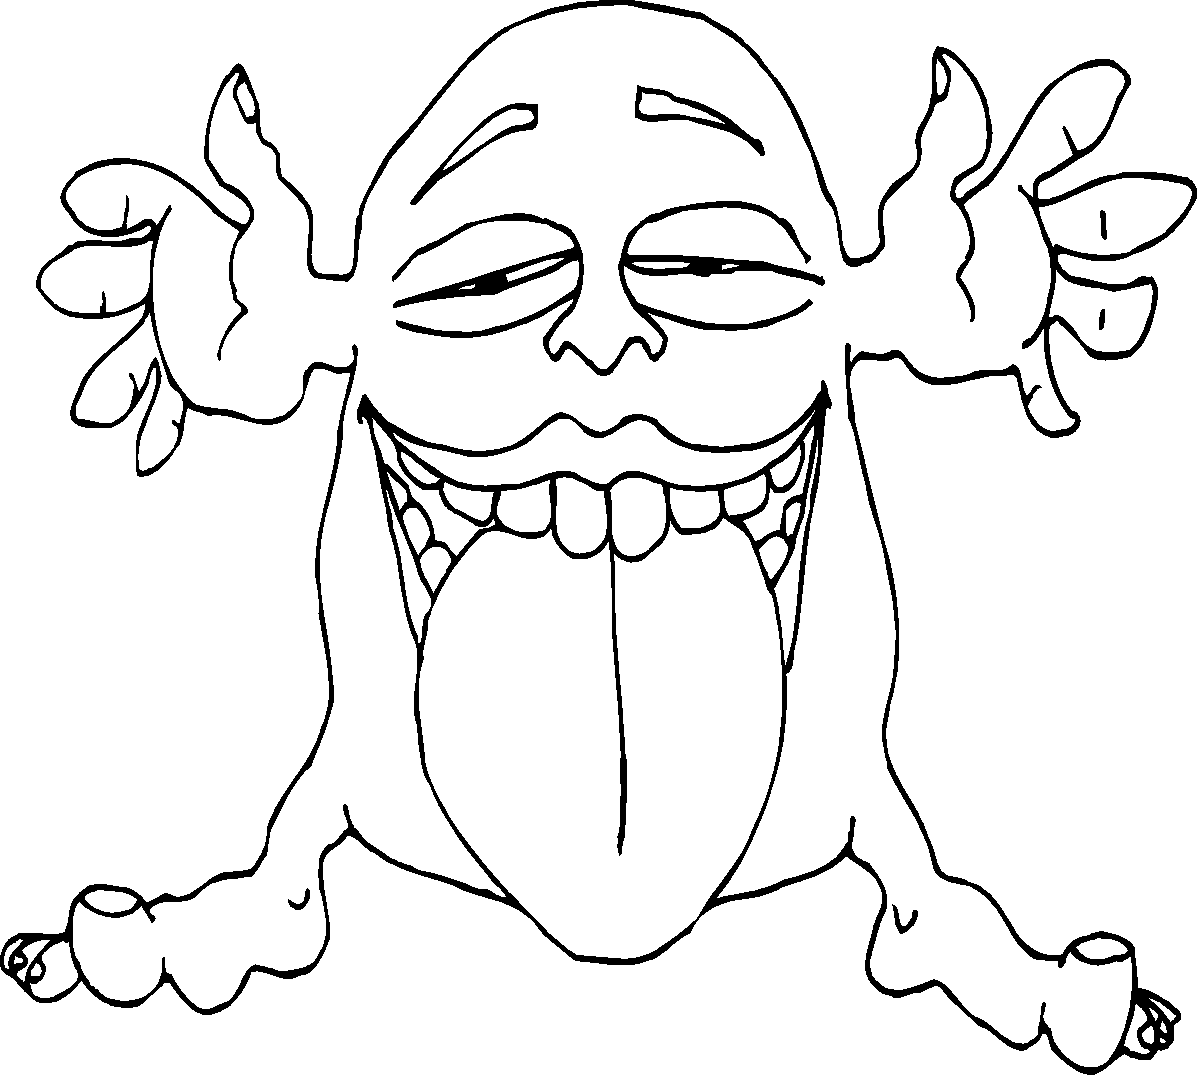 Free Silly Monster Coloring Pages Effy Moom Free Coloring Picture wallpaper give a chance to color on the wall without getting in trouble! Fill the walls of your home or office with stress-relieving [effymoom.blogspot.com]